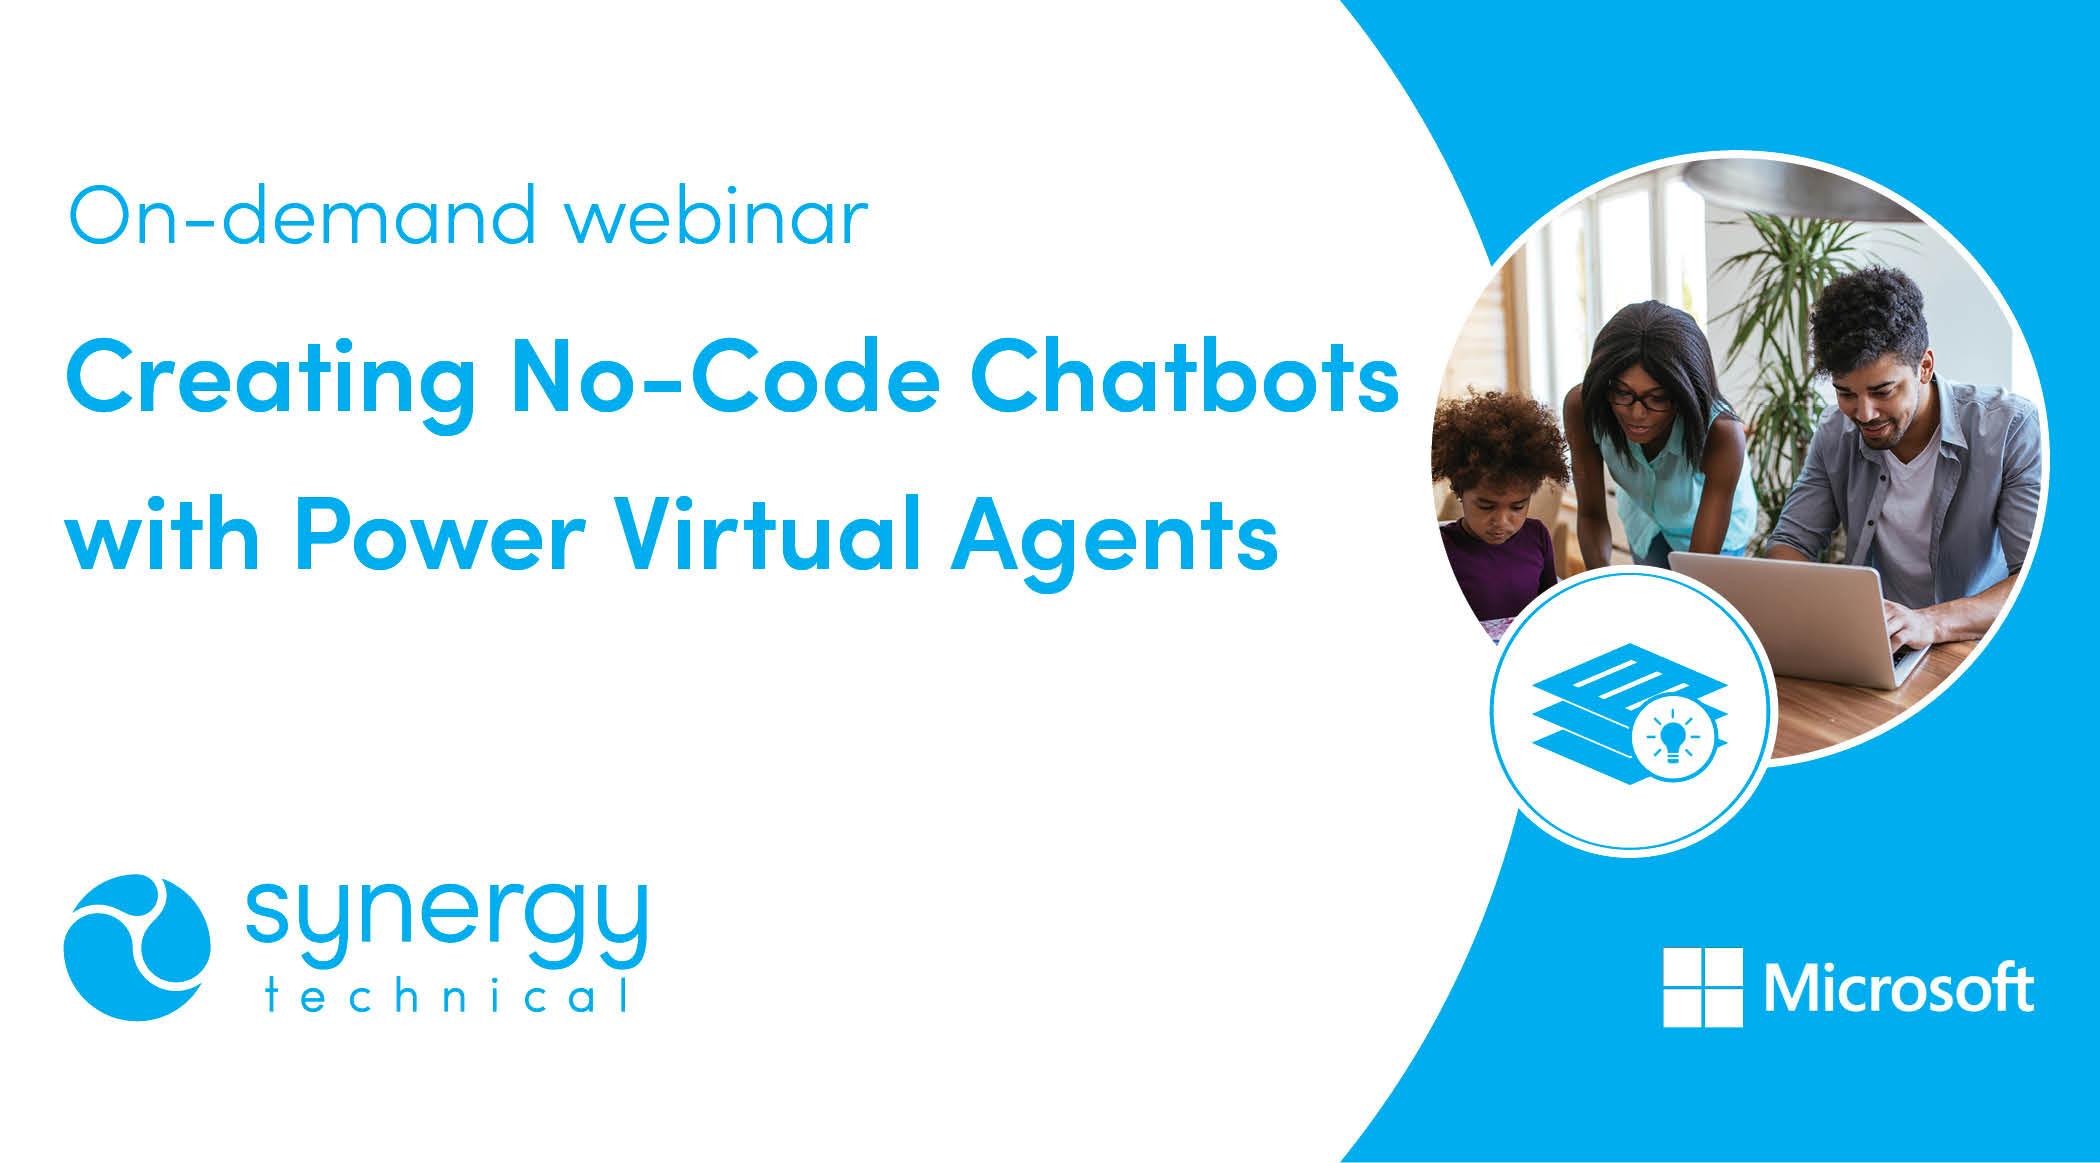 Creating No-Code Chatbots with Power Virtual Agents